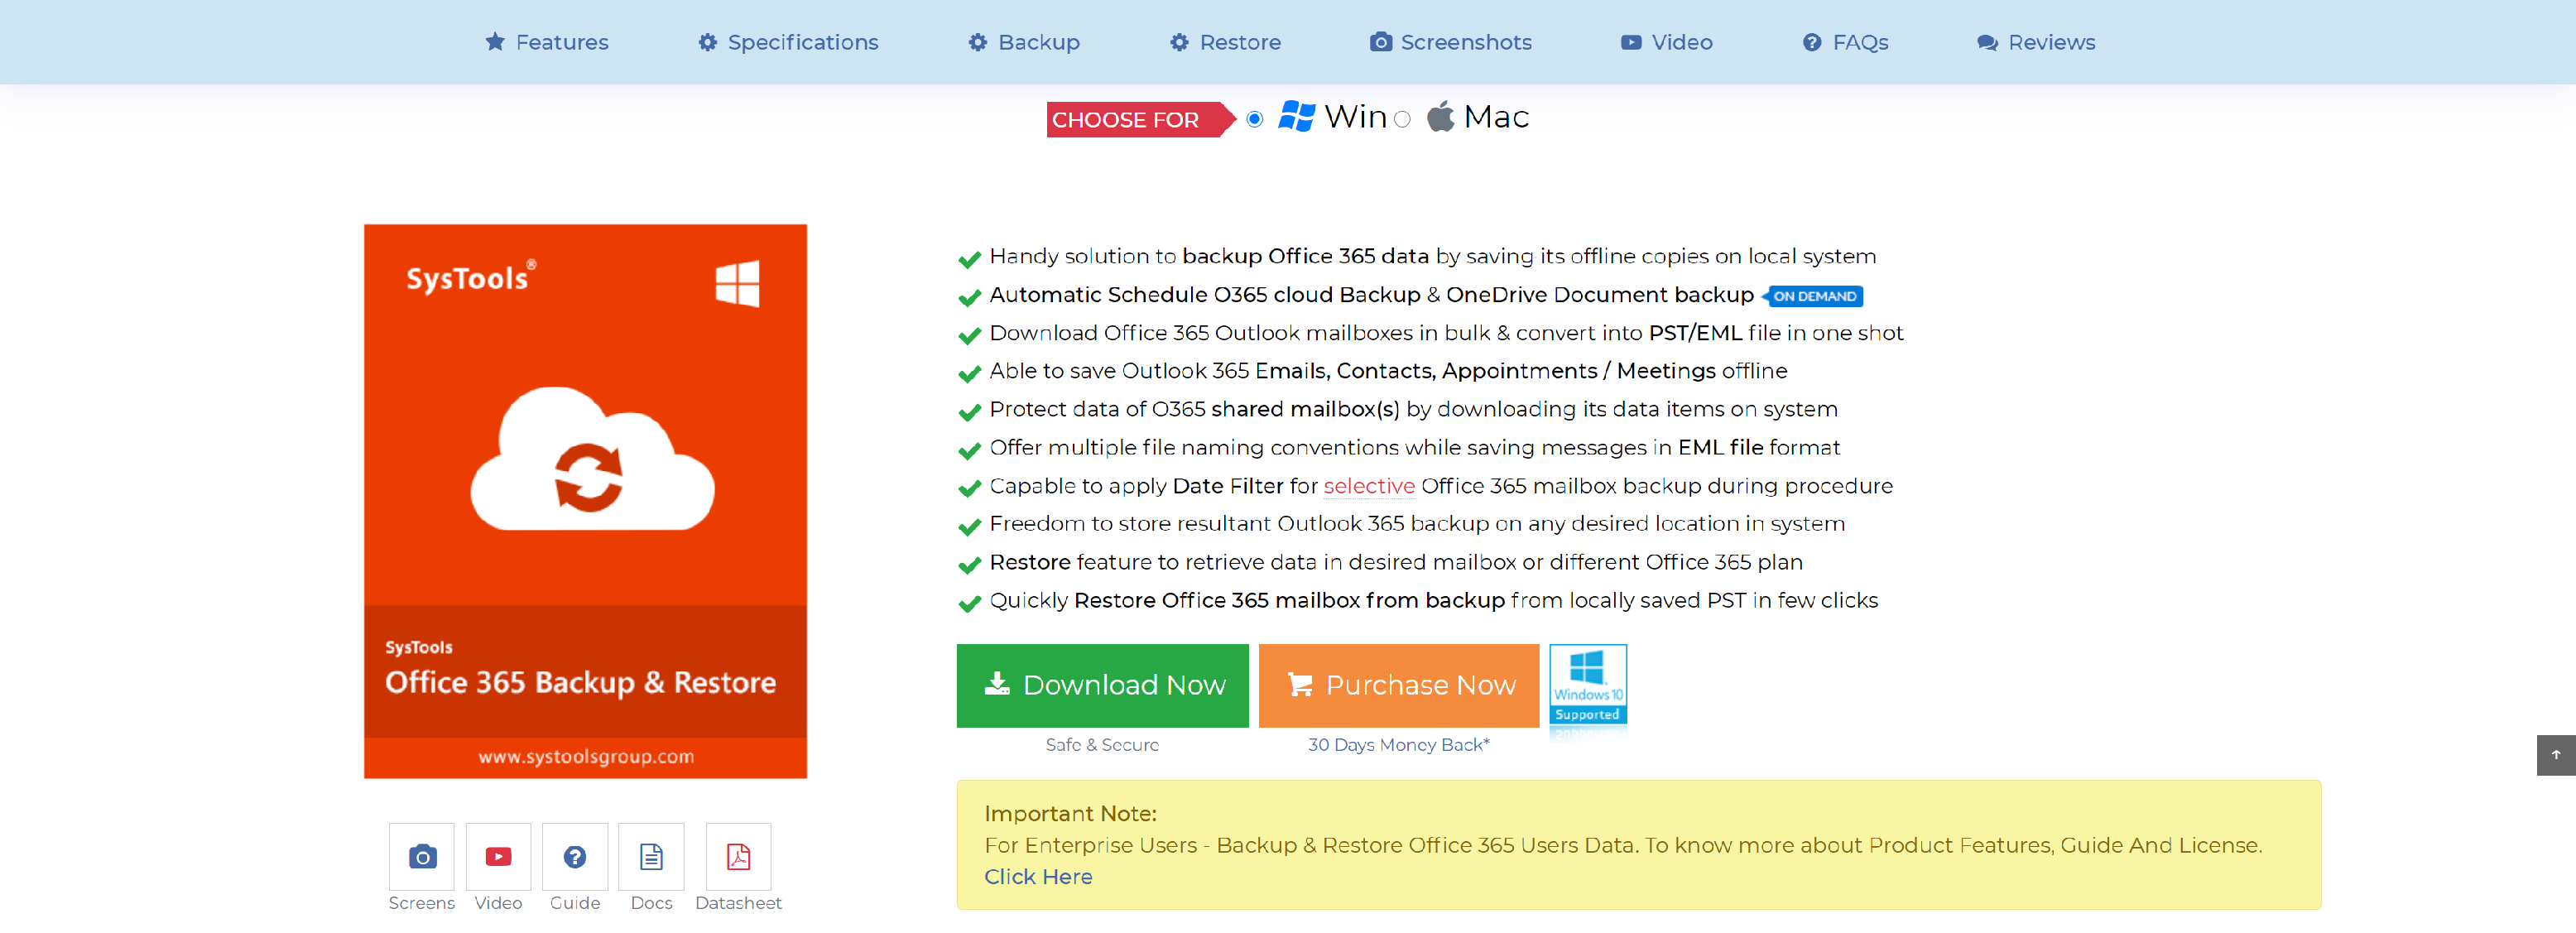 systools office 365 backup and restore tool from microsoft